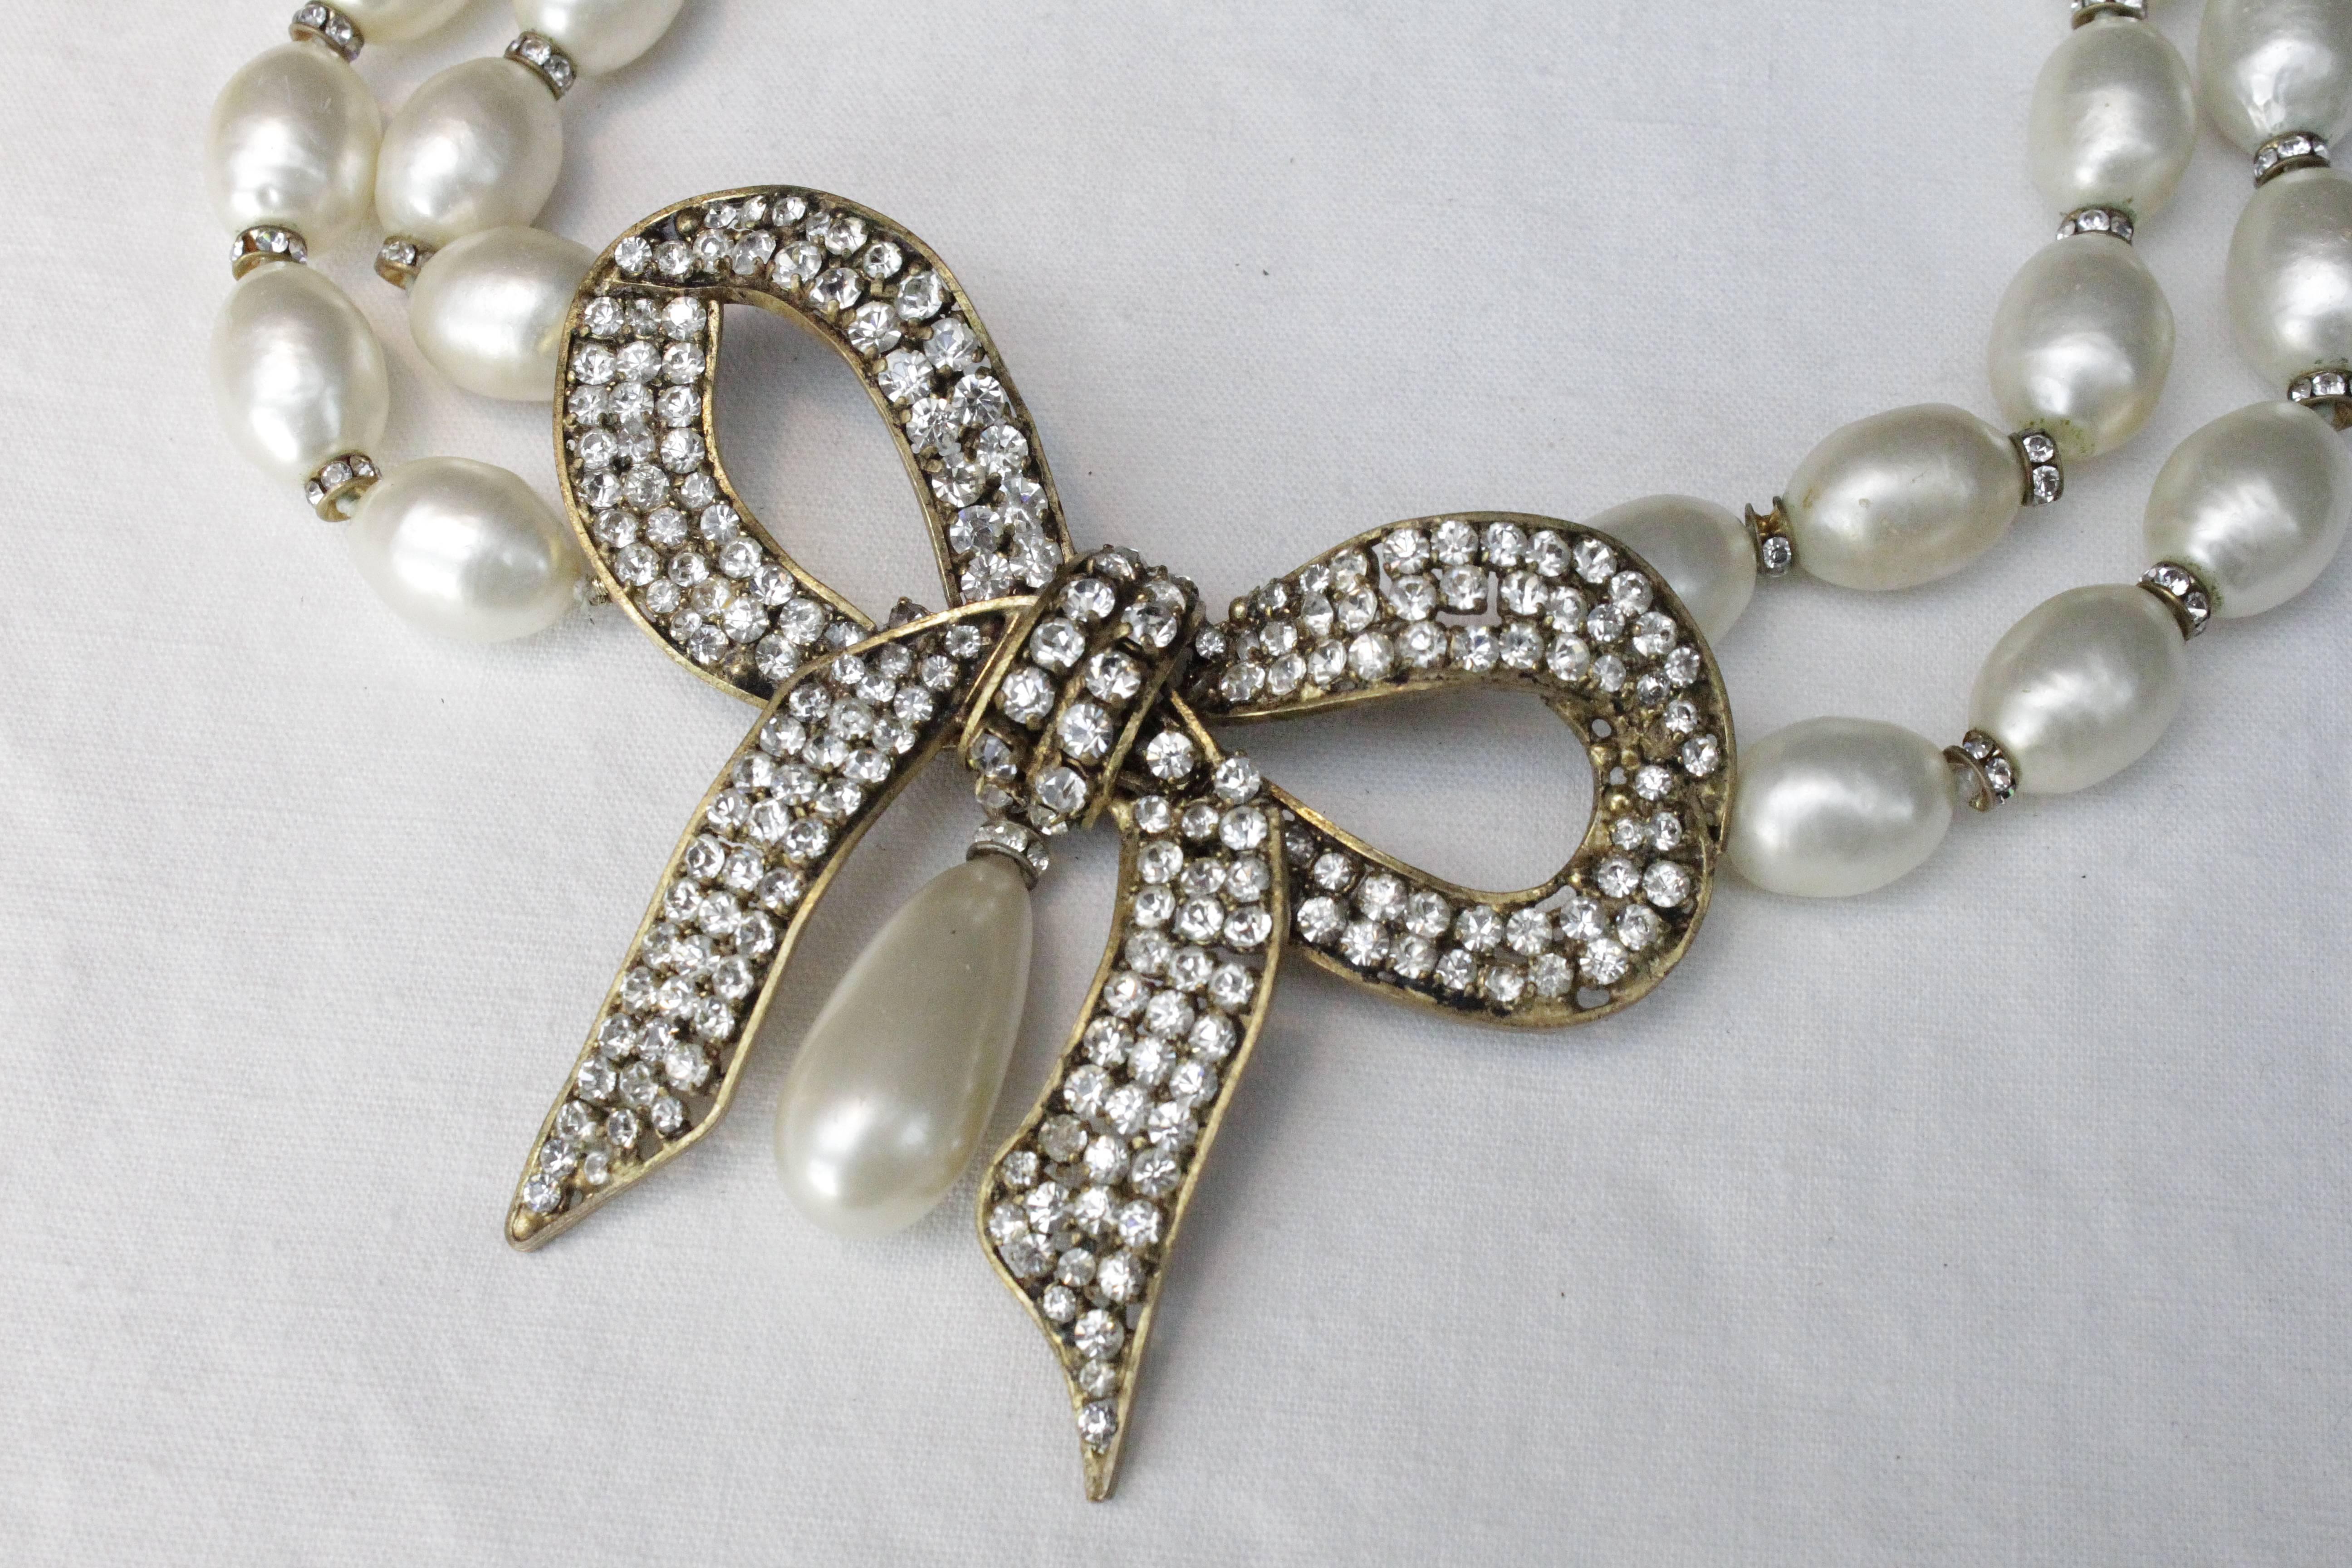 Women's 1970s Chanel Faux Pearls Necklace with Crystals Bow